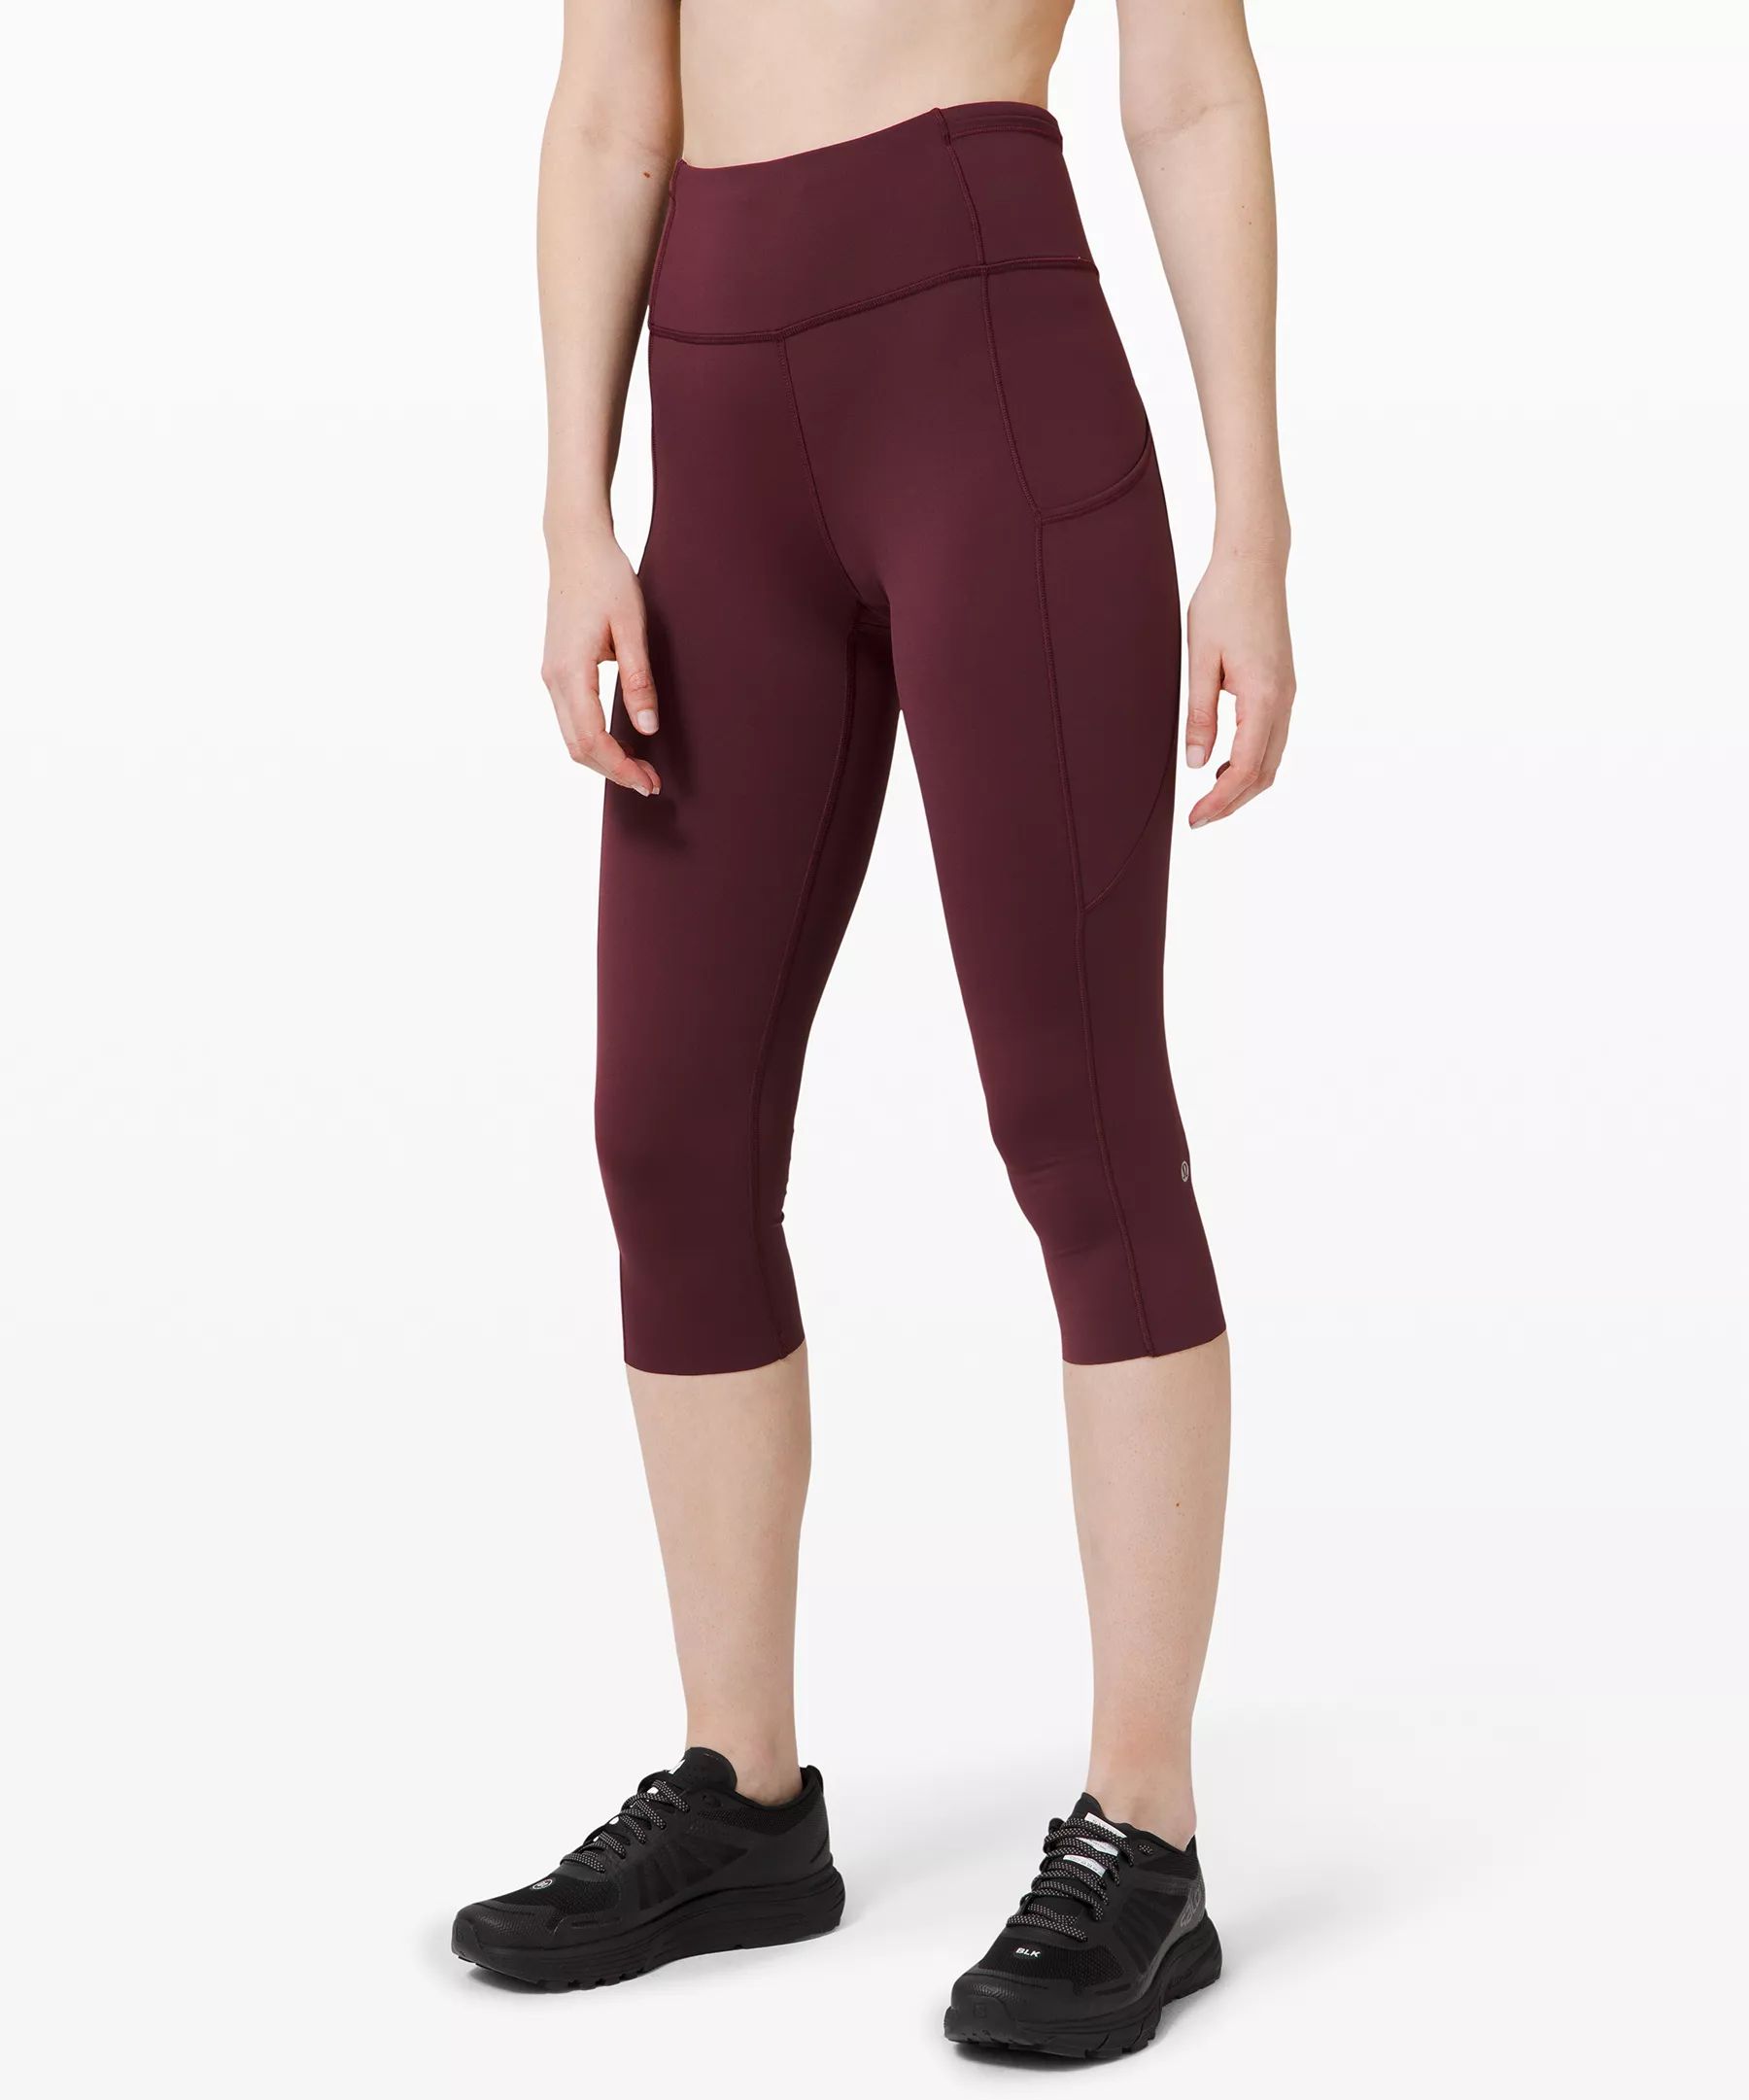 Fast and Free Crop II 19" Non-Reflective | Lululemon (US)